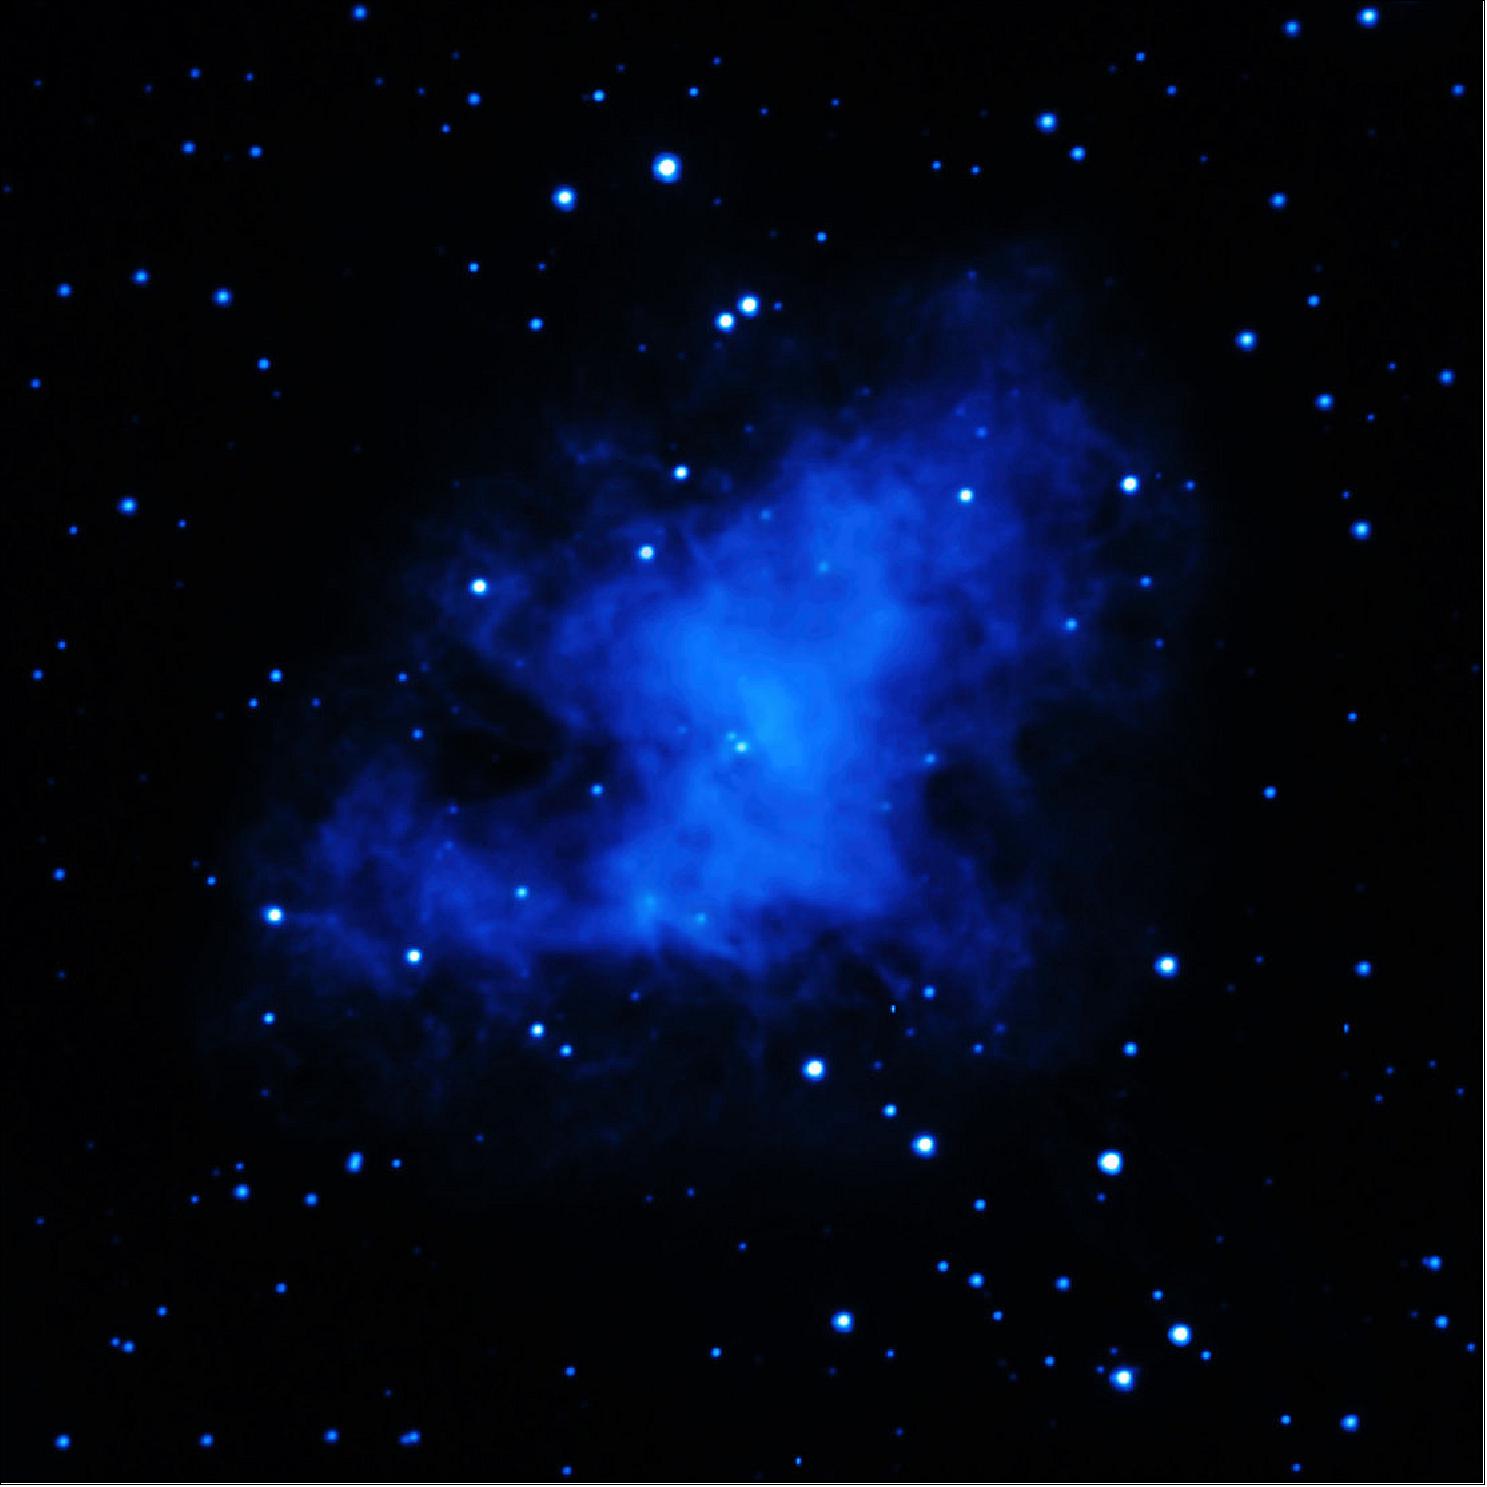 Figure 85: This image was taken as part of detailed multi-wavelength study of the Crab Nebula, with images also taken in X-rays, radio waves, infrared and optical wavelengths (image credit: ESA)